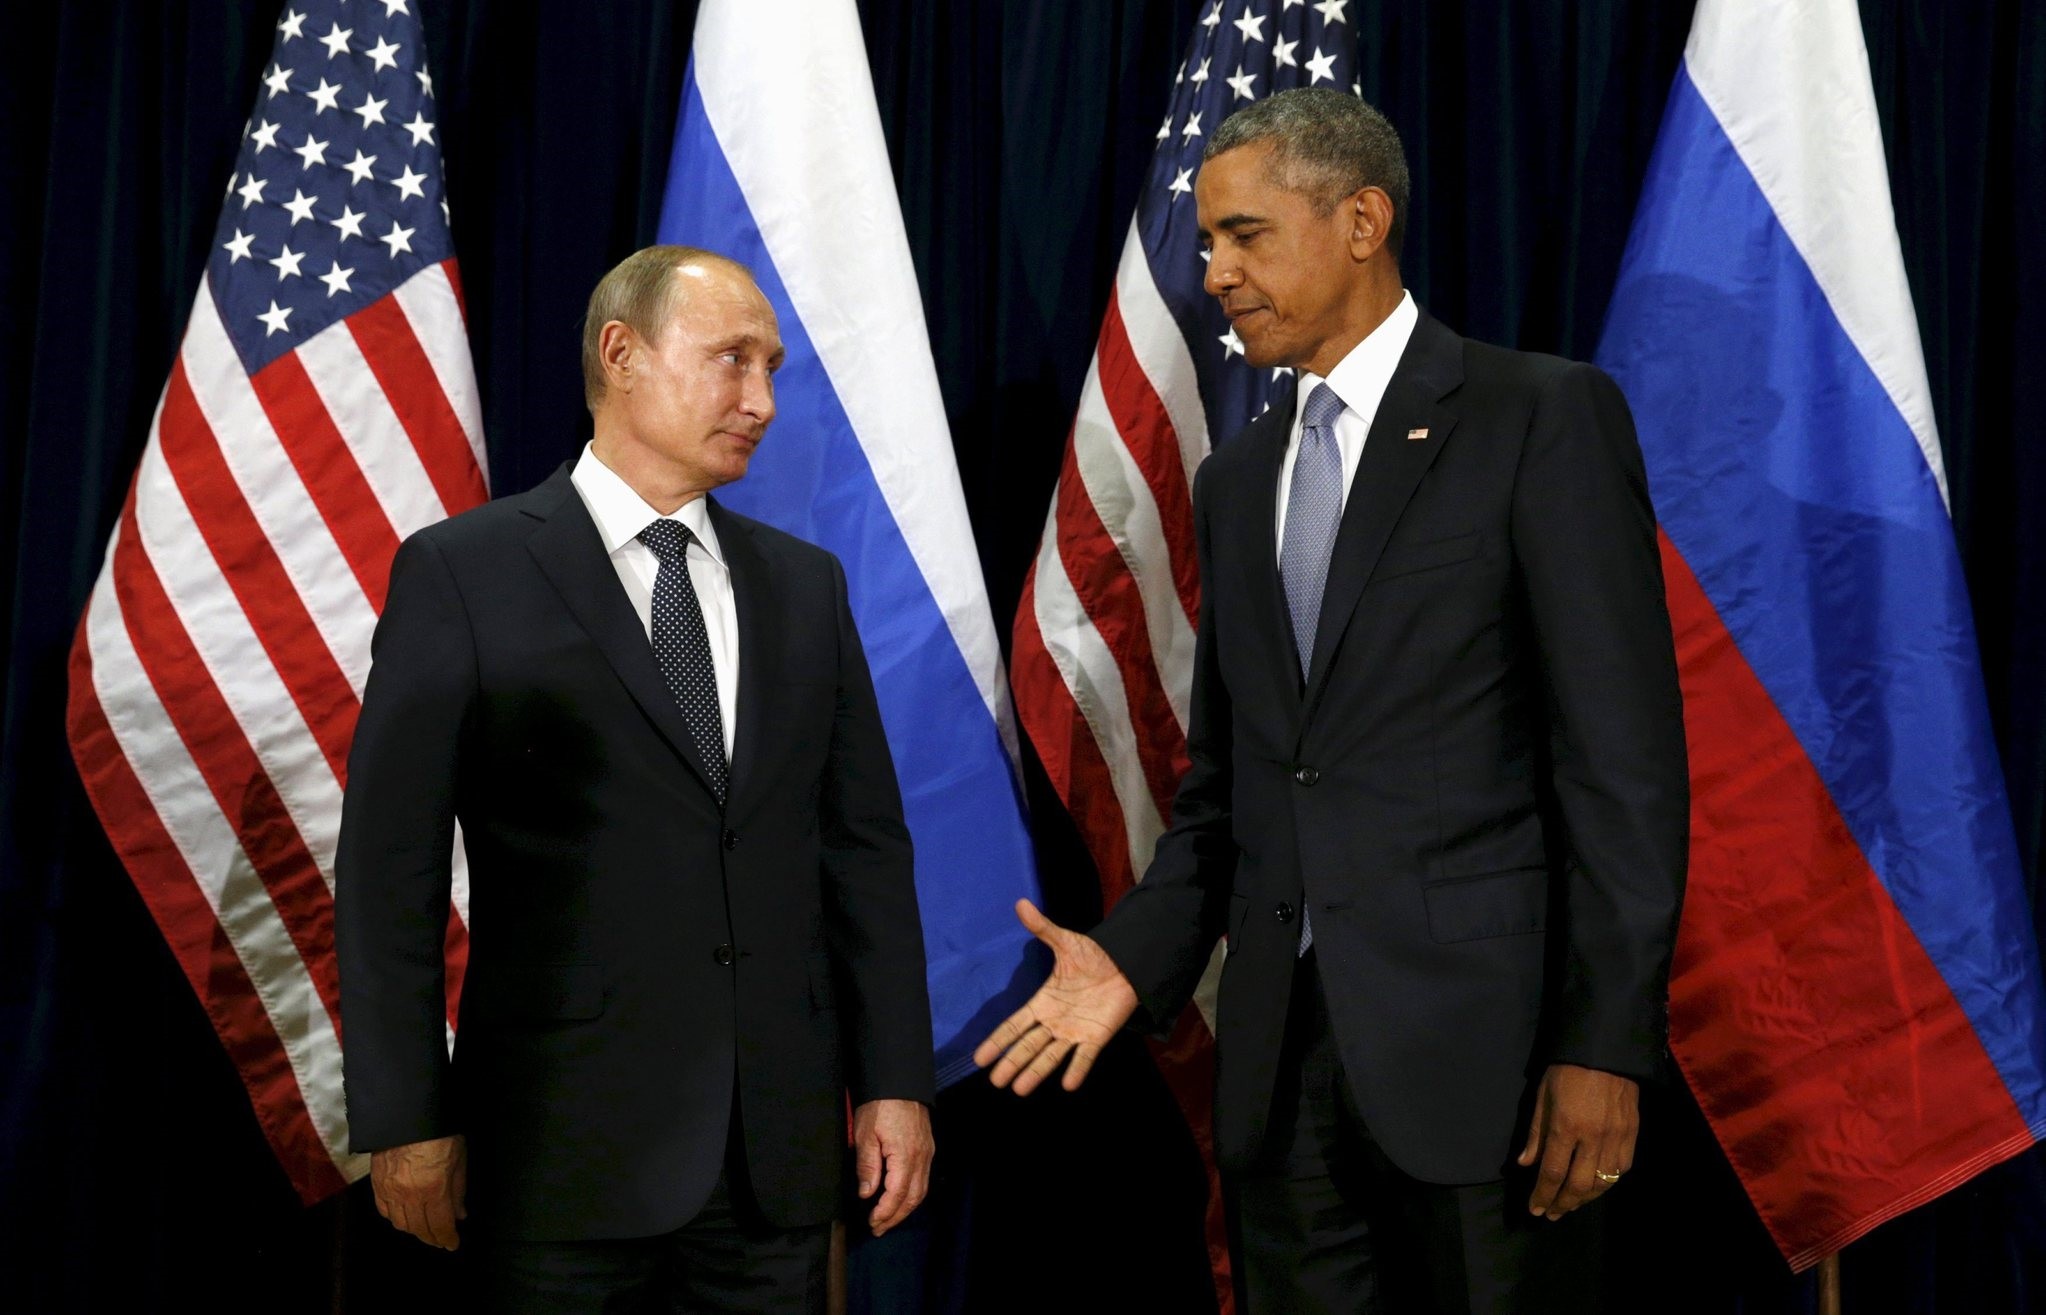 U.S. President Barack Obama extends his hand to Russian President Vladimir Putin during their meeting at the United Nations General Assembly in New York September 28, 2015. (REUTERS Photo)